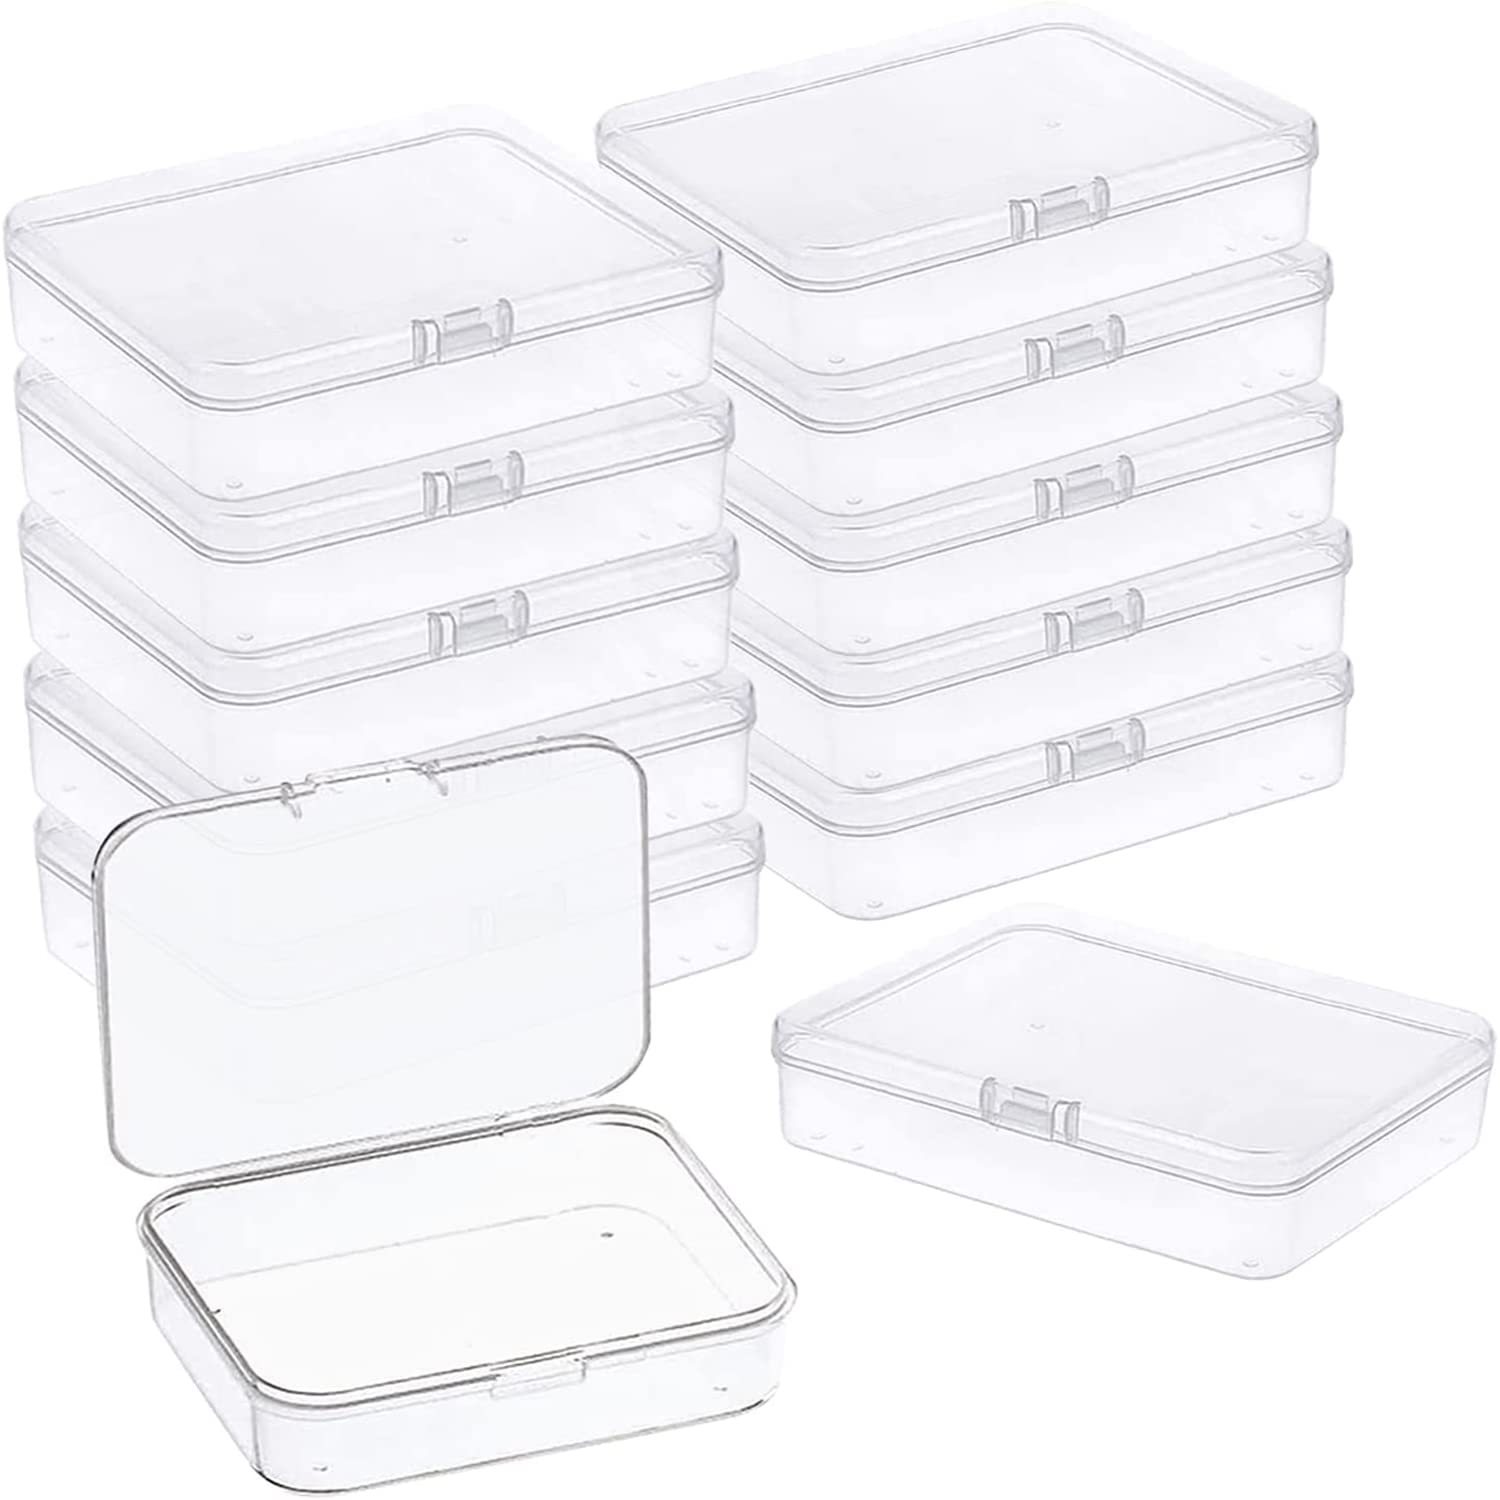 Primary image for 12 Pcs Mini Plastic Storage Containers Box With Lid, 4.5X3.4 Inches Clear Rectan